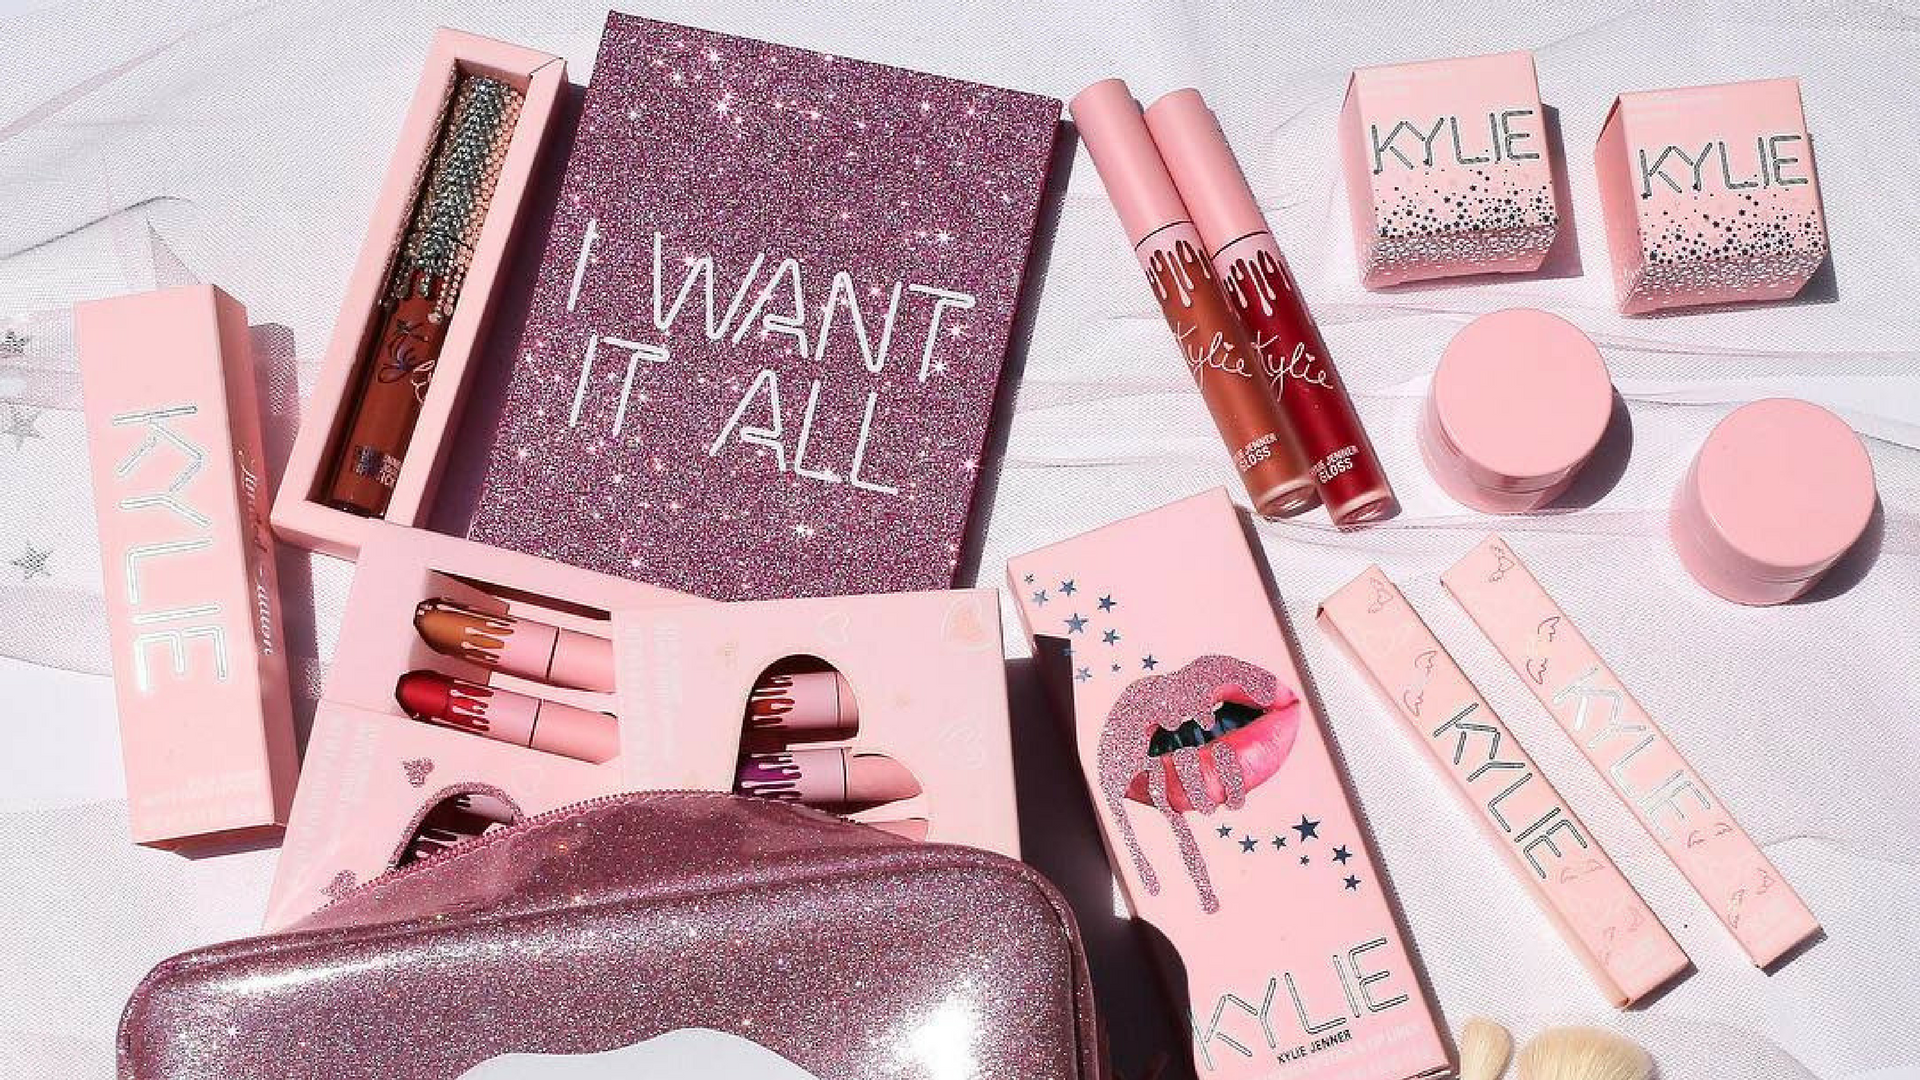 Kylie Cosmetics Is On Track To Make Dhs3 Trillion By